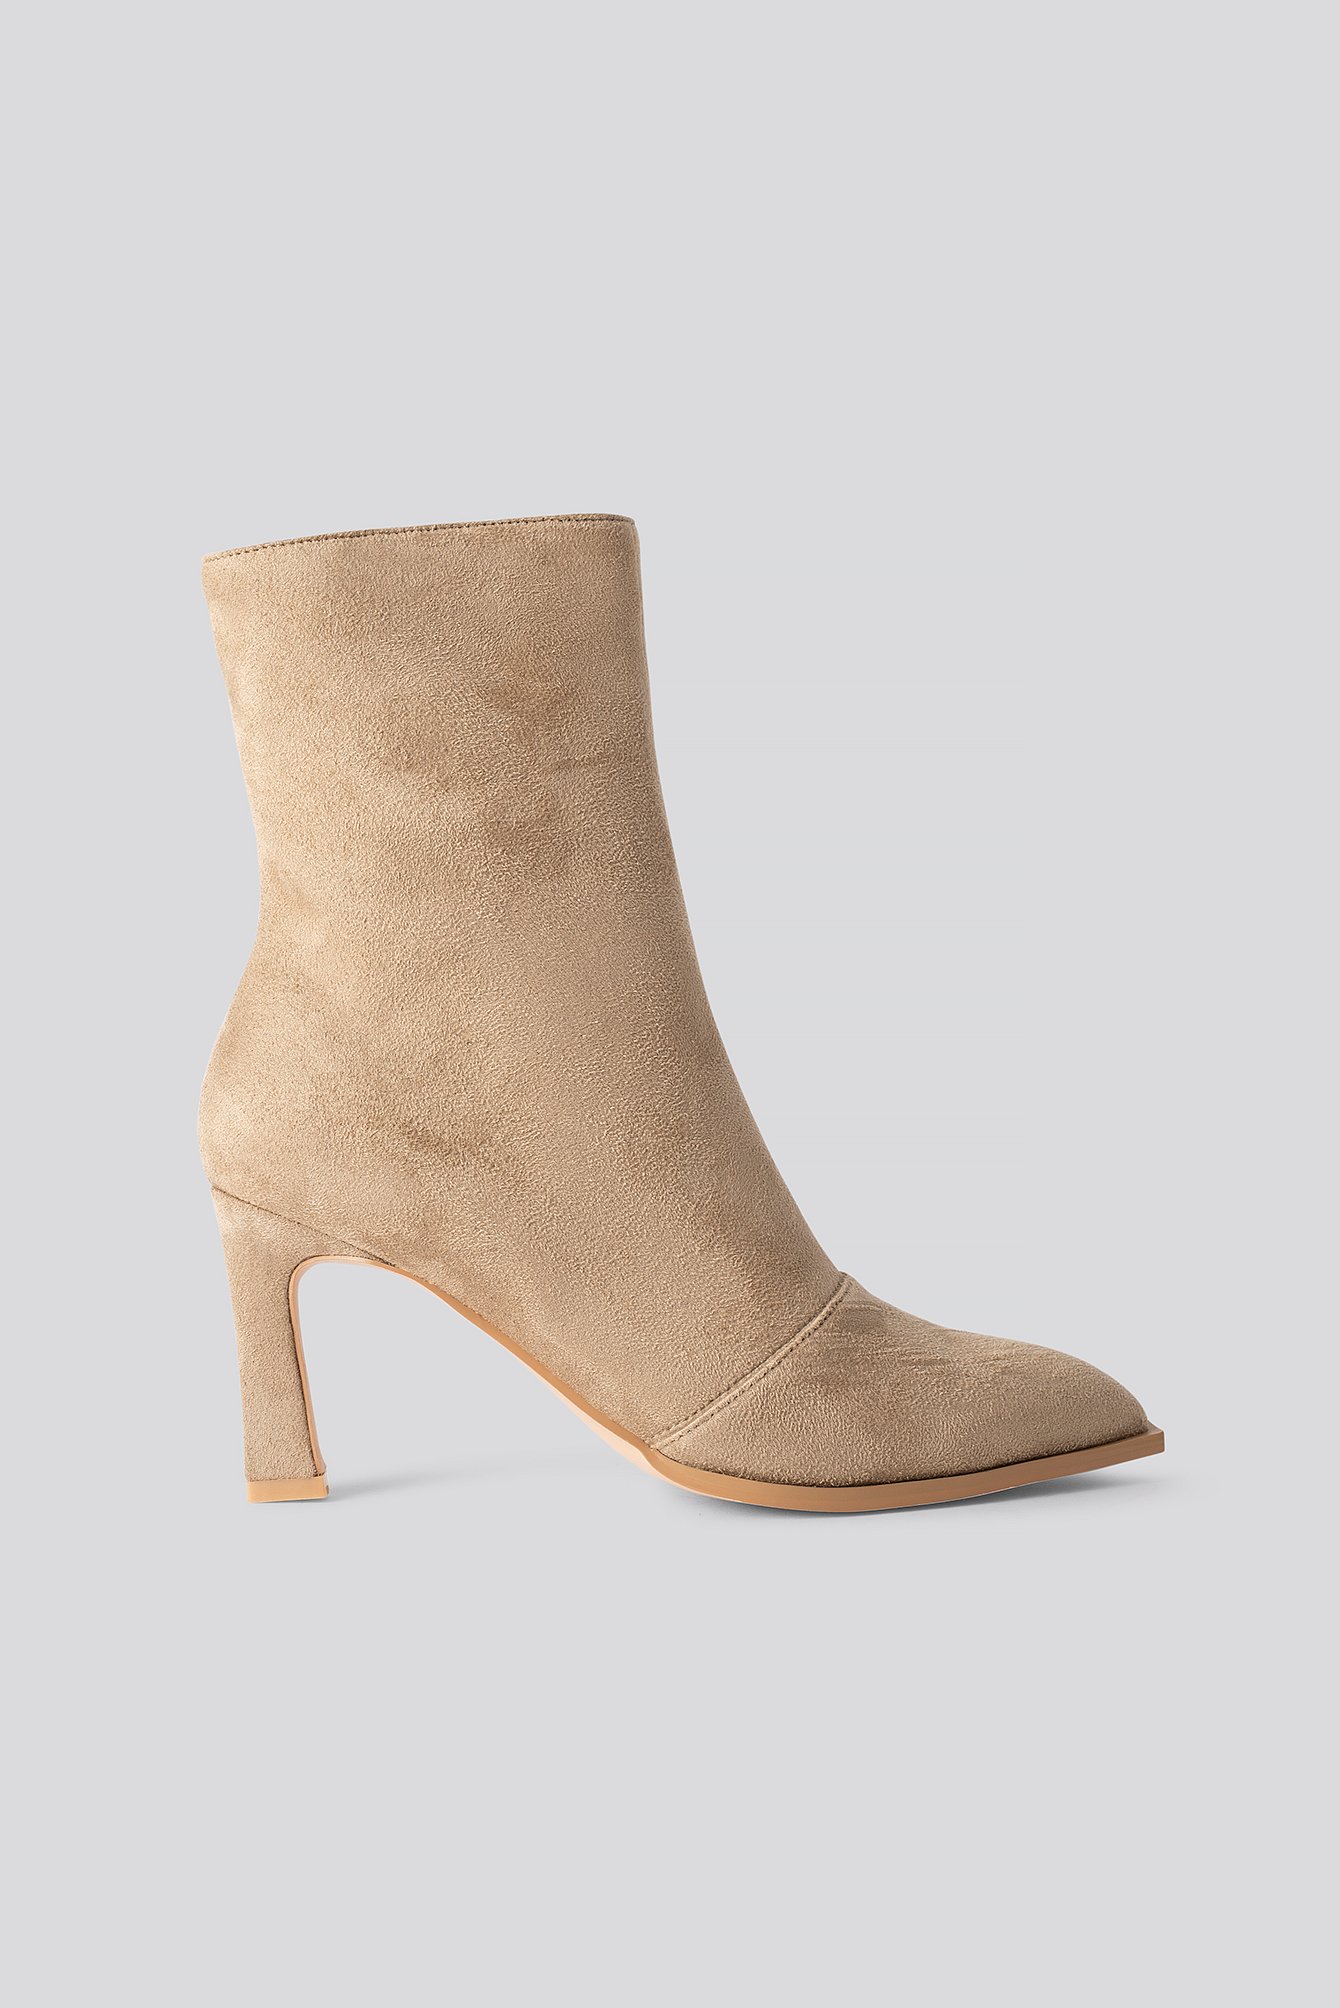 NA-KD Shoes Suede Look Heeled Boots - Beige